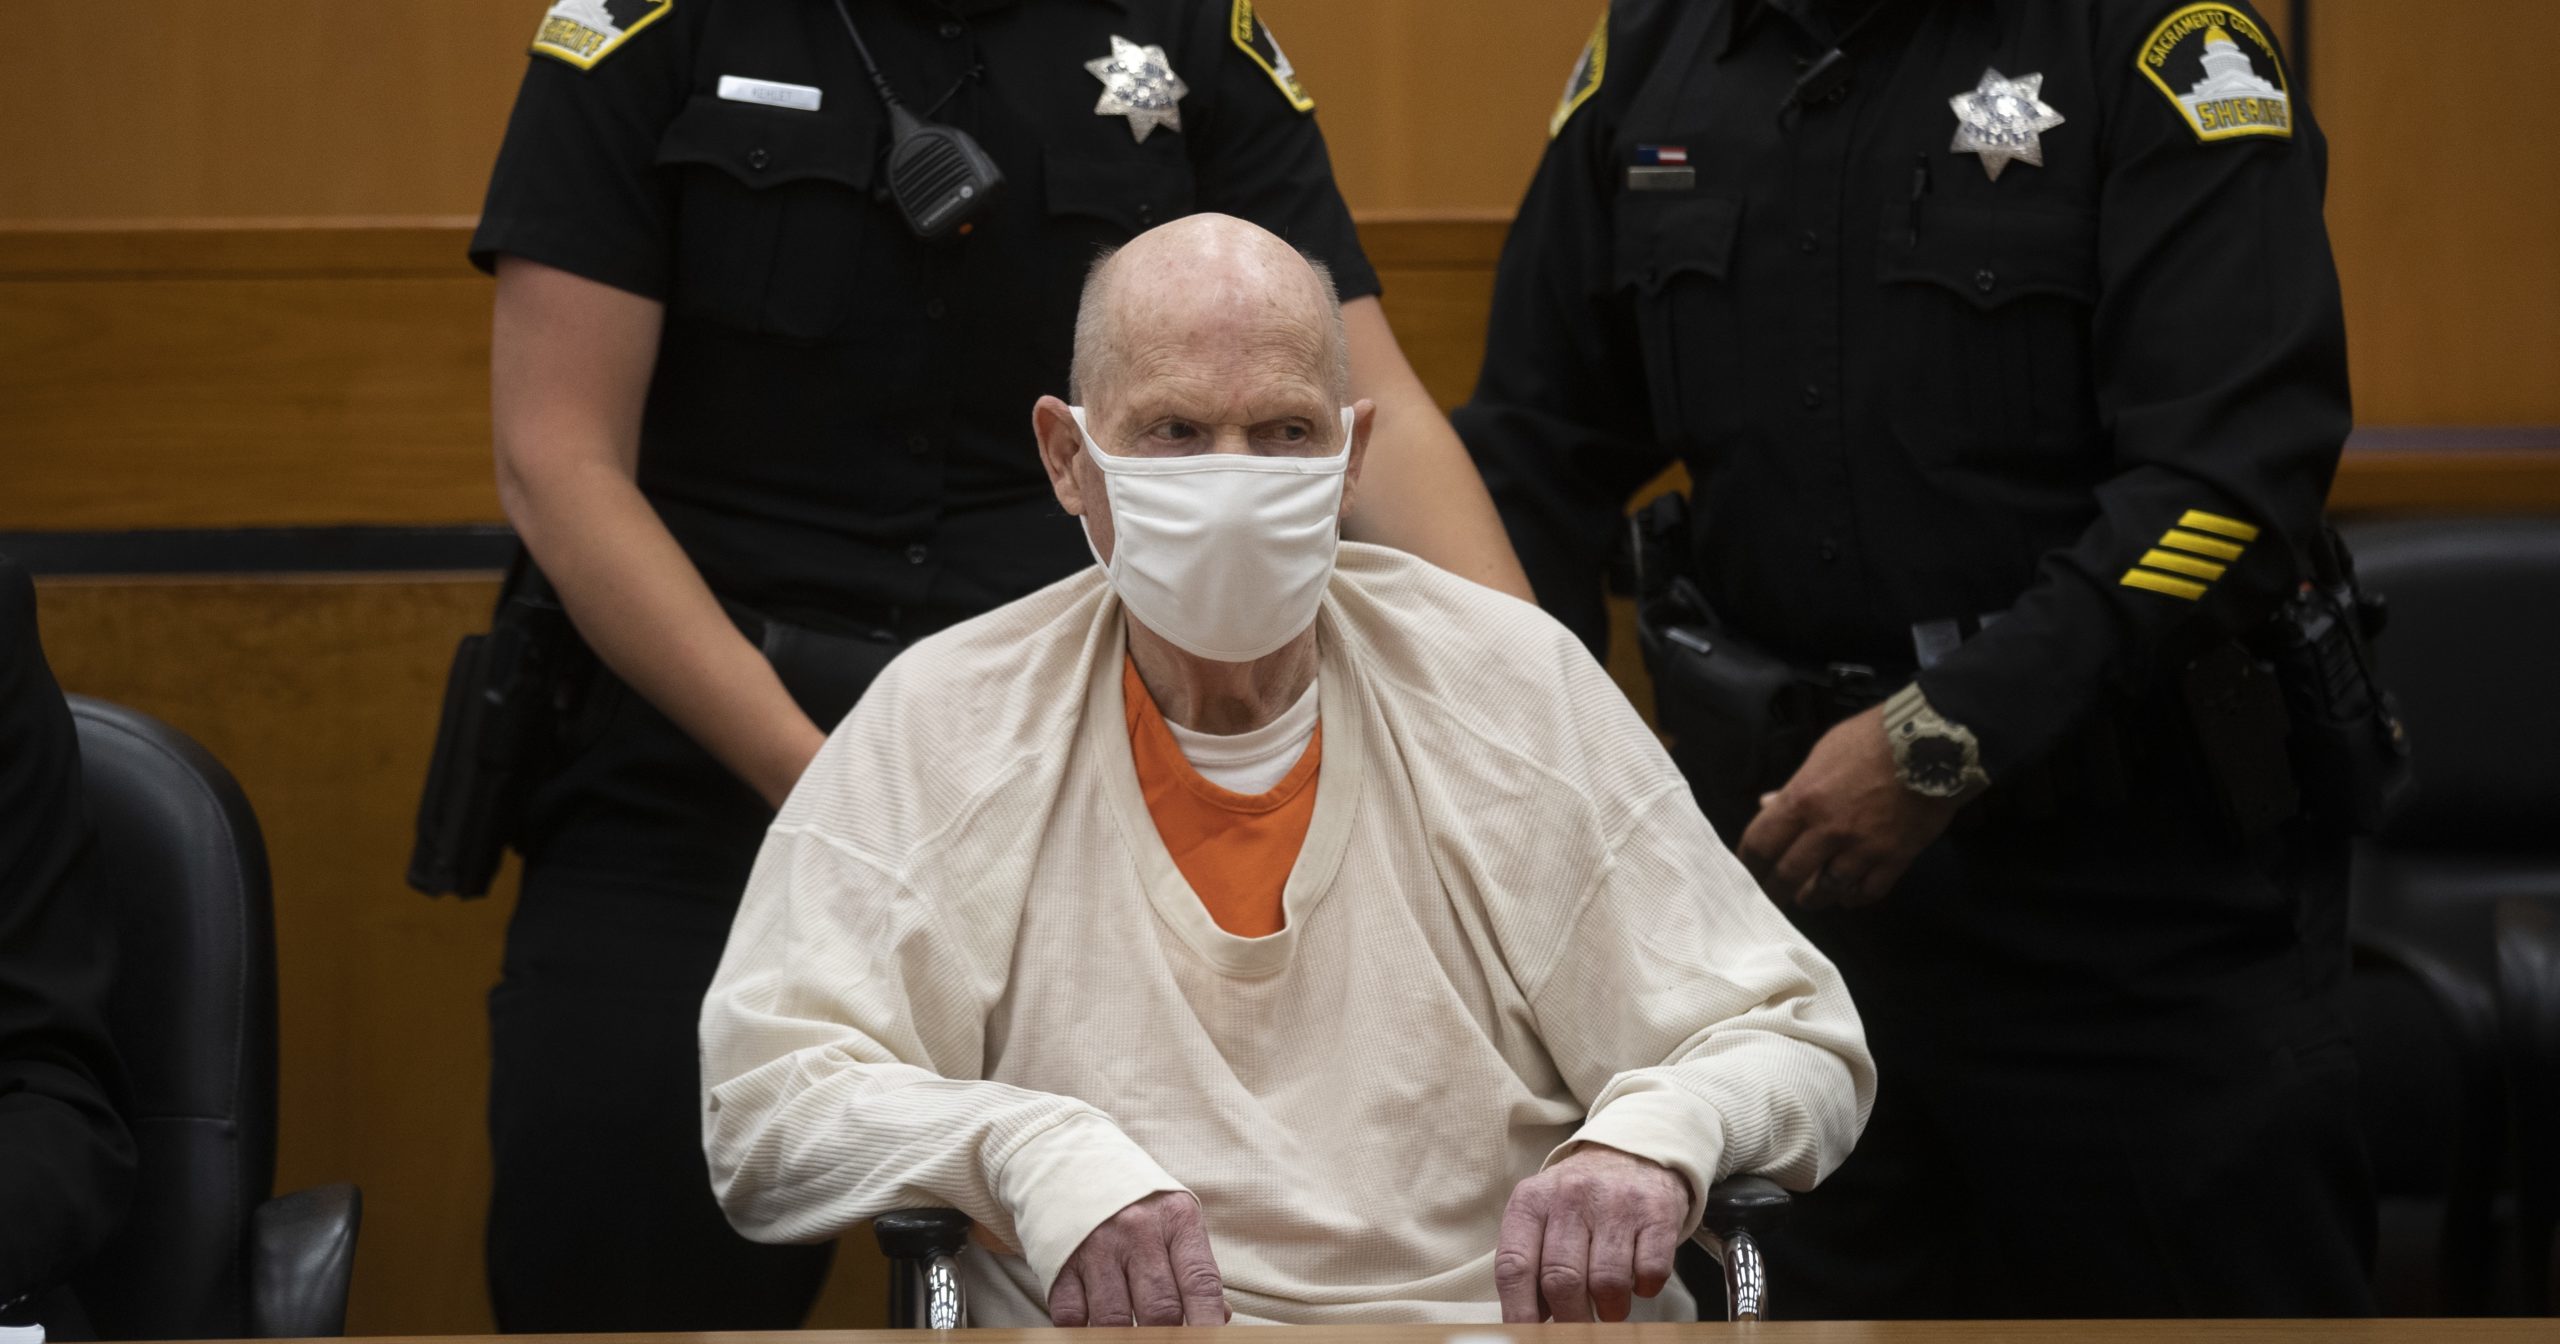 Joseph James DeAngelo is brought out of the courtroom at the Gordon D. Schaber Sacramento County Courthouse on Aug. 20, 2020, in Sacramento, California. DeAngelo, who eluded capture for four decades before being identified as the Golden State Killer, pleaded guilty in June to 13 murders and 13 rape-related charges stemming from crimes in the 1970s and 1980s. DeAngelo was sentenced to life in prison on Aug. 21, 2020.